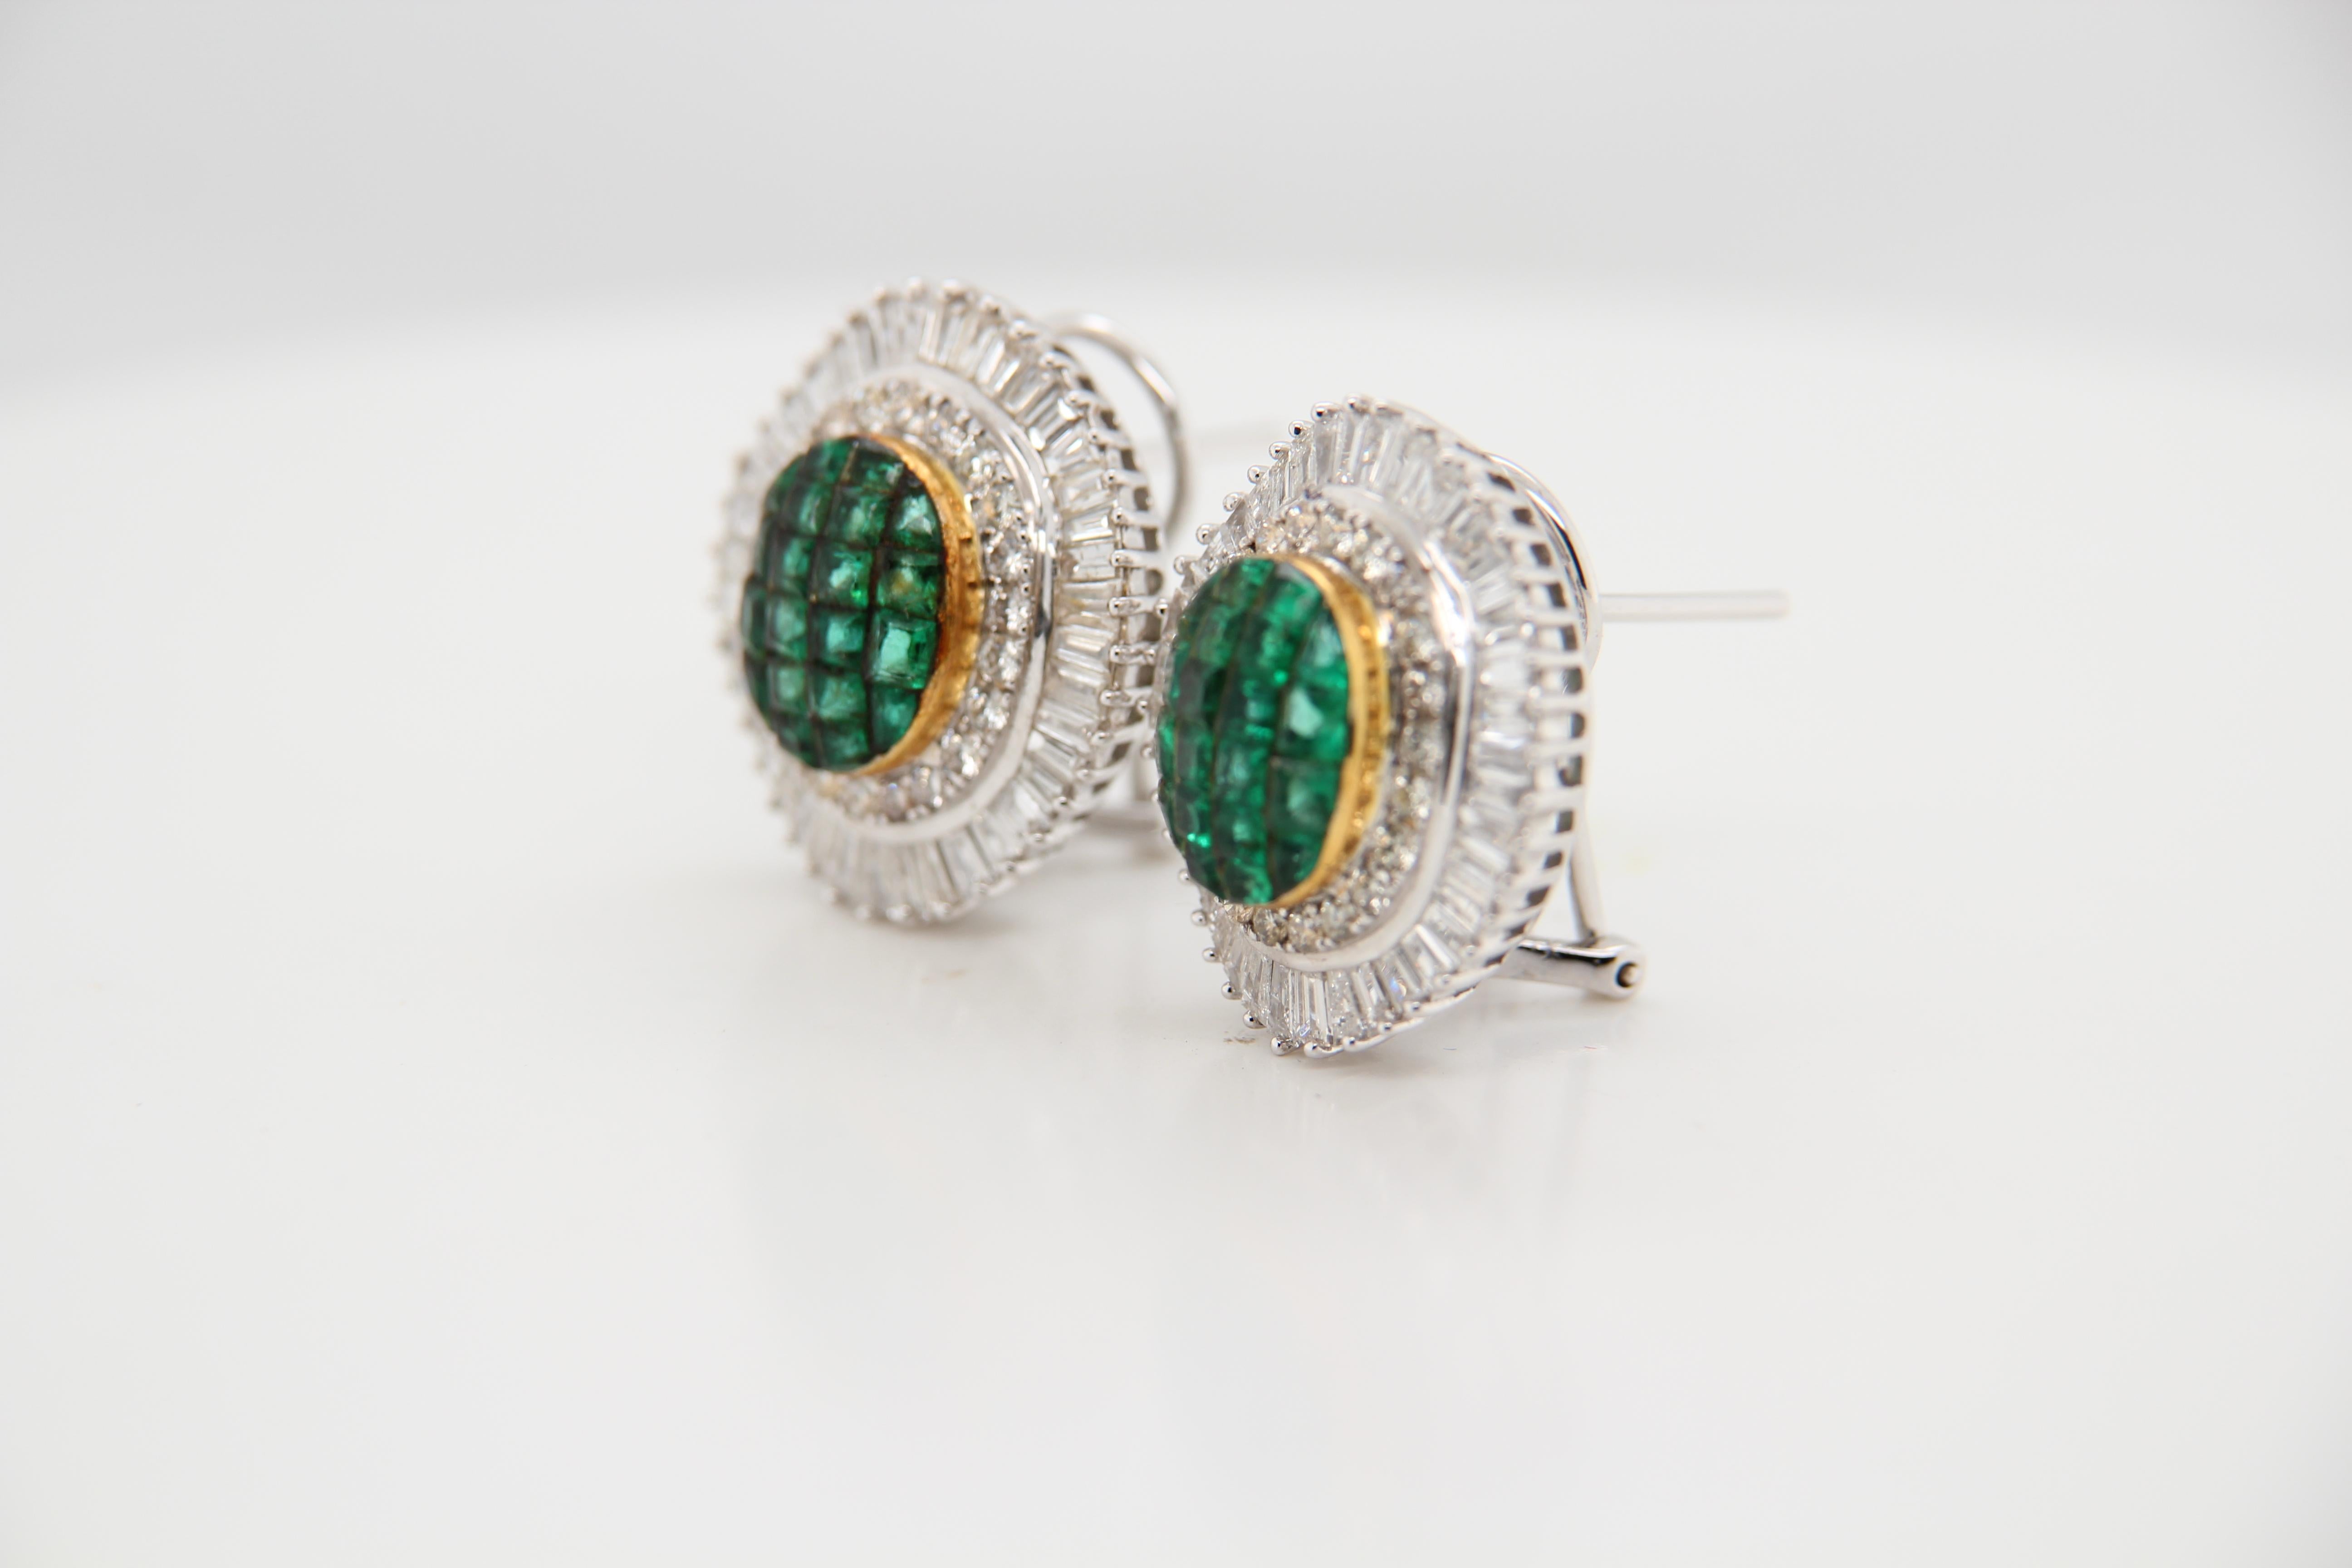 An emerald and diamond earring. The earring is studded with 7.00 carat emeralds and 3.65 carat diamonds. The earring is made in 18 karat white gold 15.56 g gross weight.